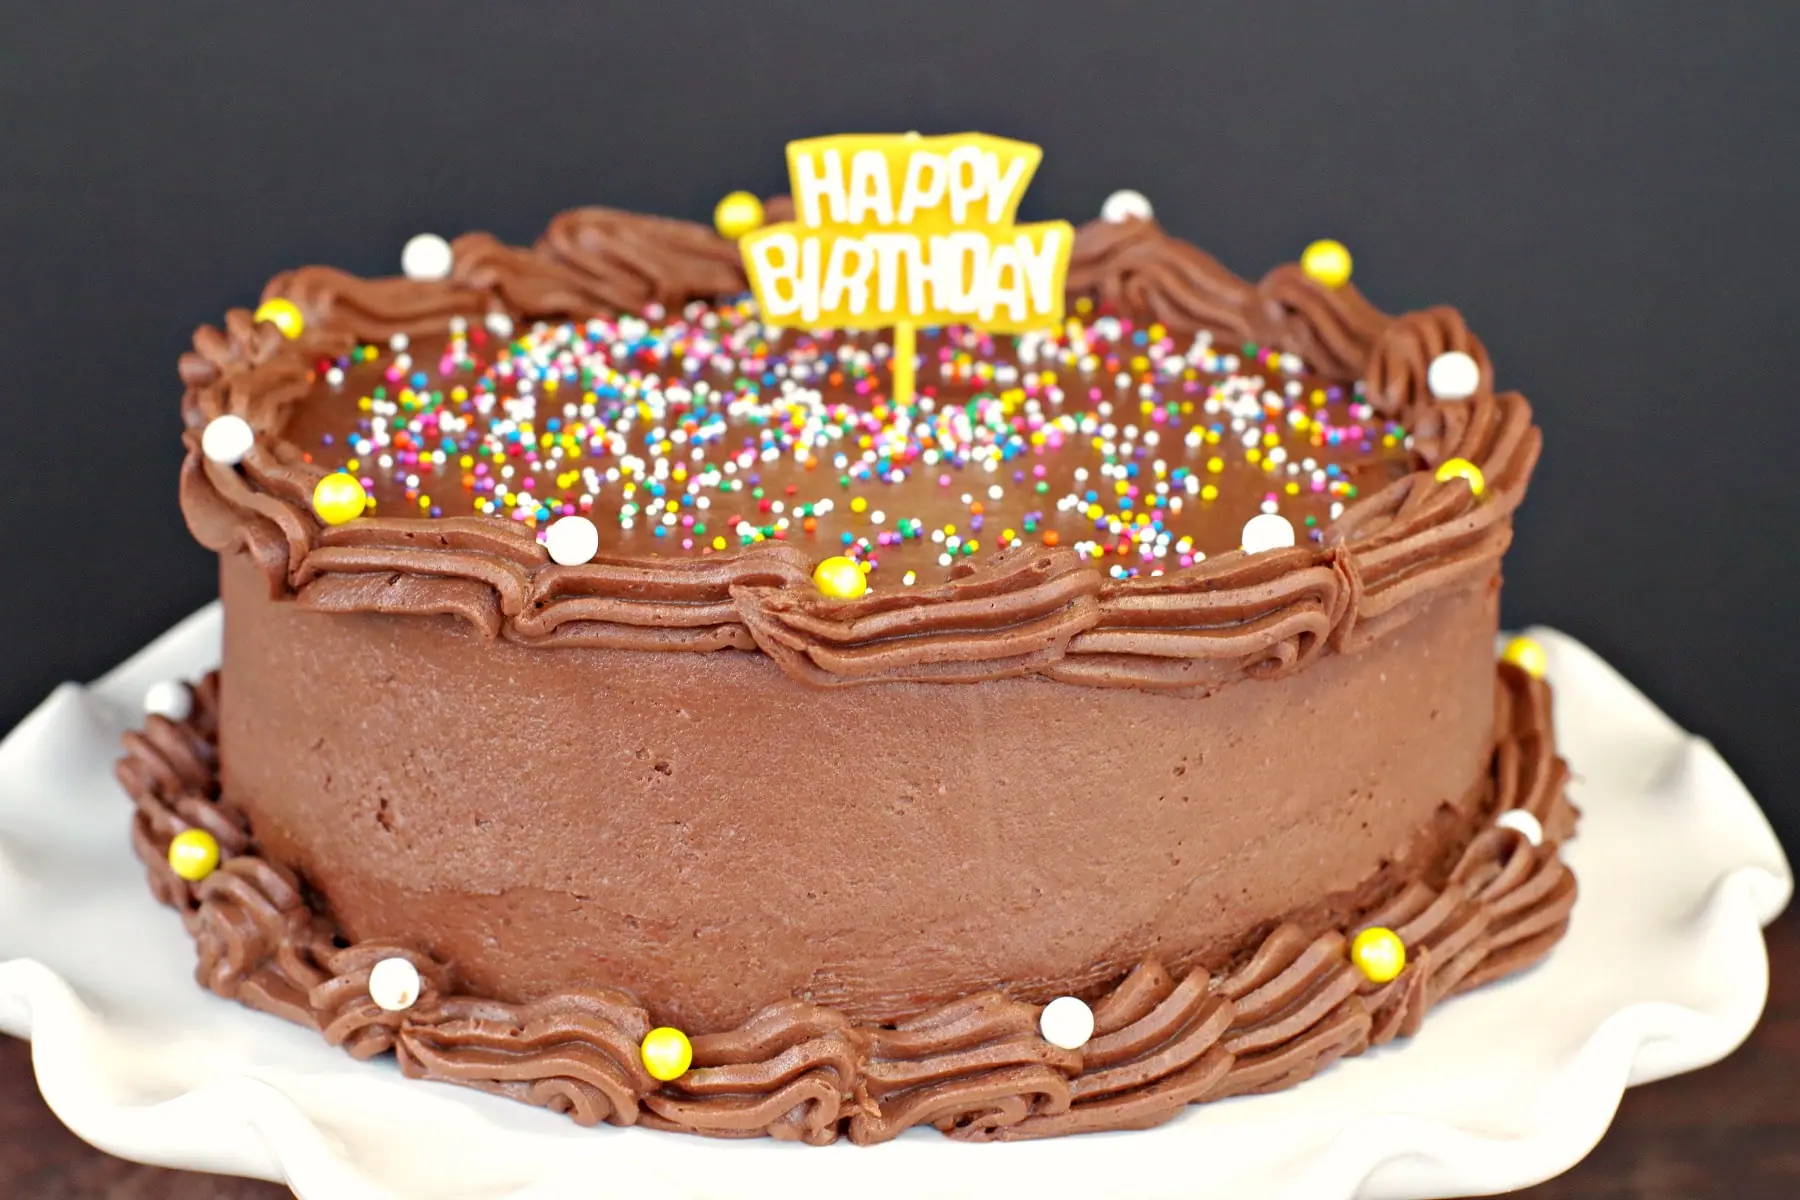 Happy birthday cake decorated with chocolate frosting without butter